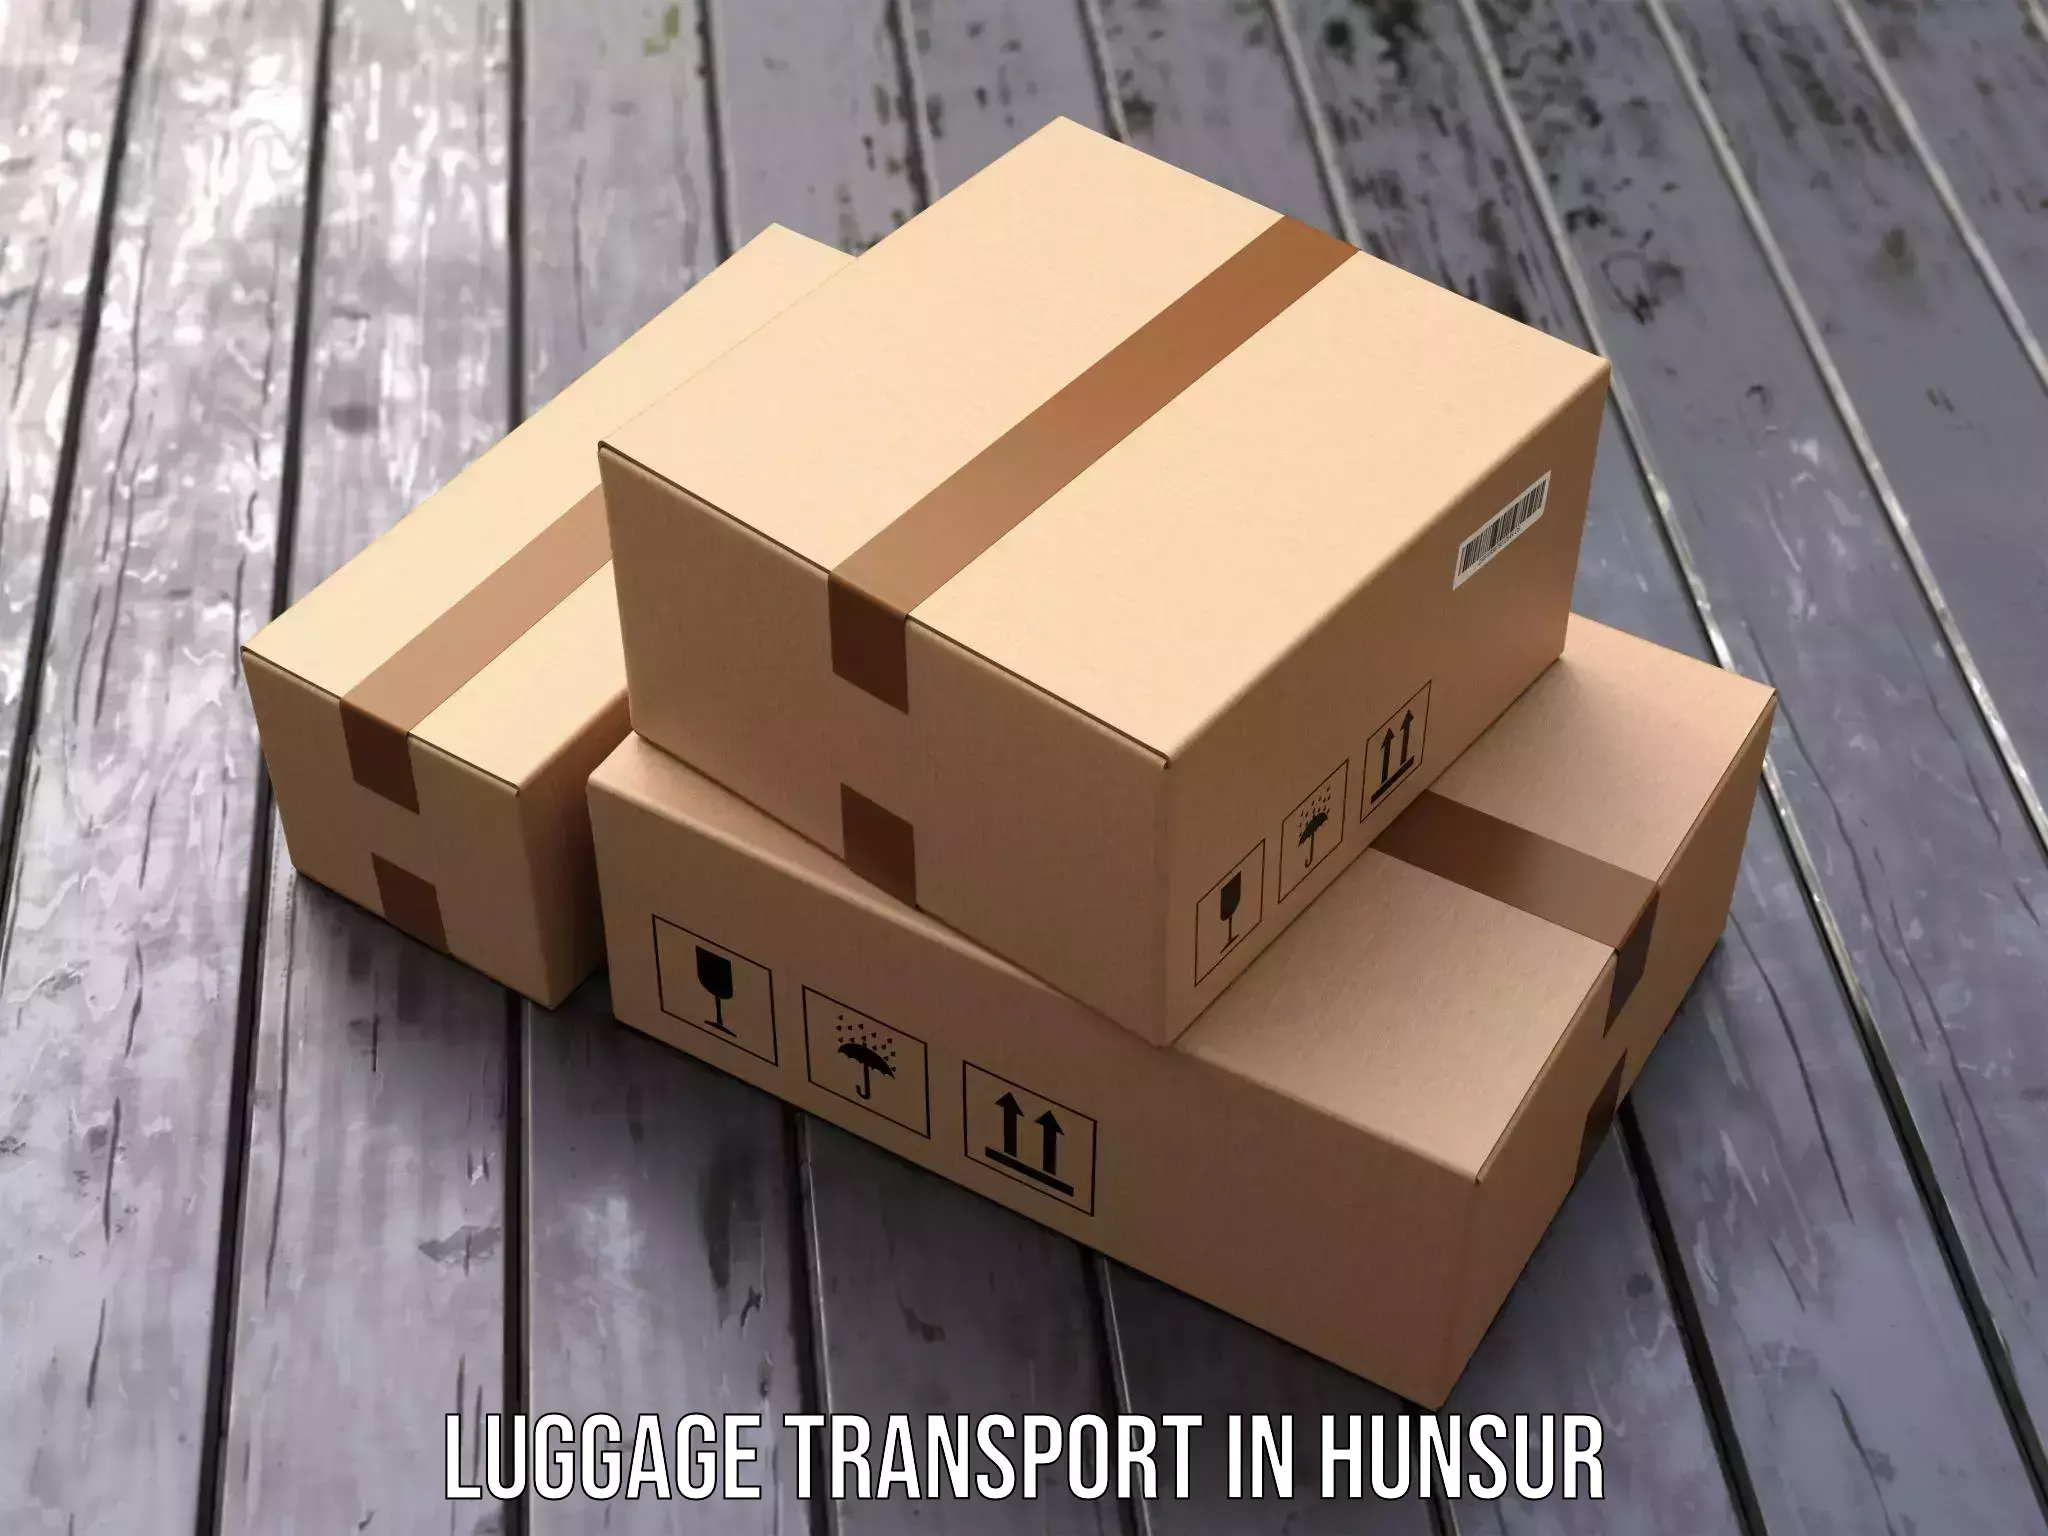 Luggage shipment specialists in Hunsur